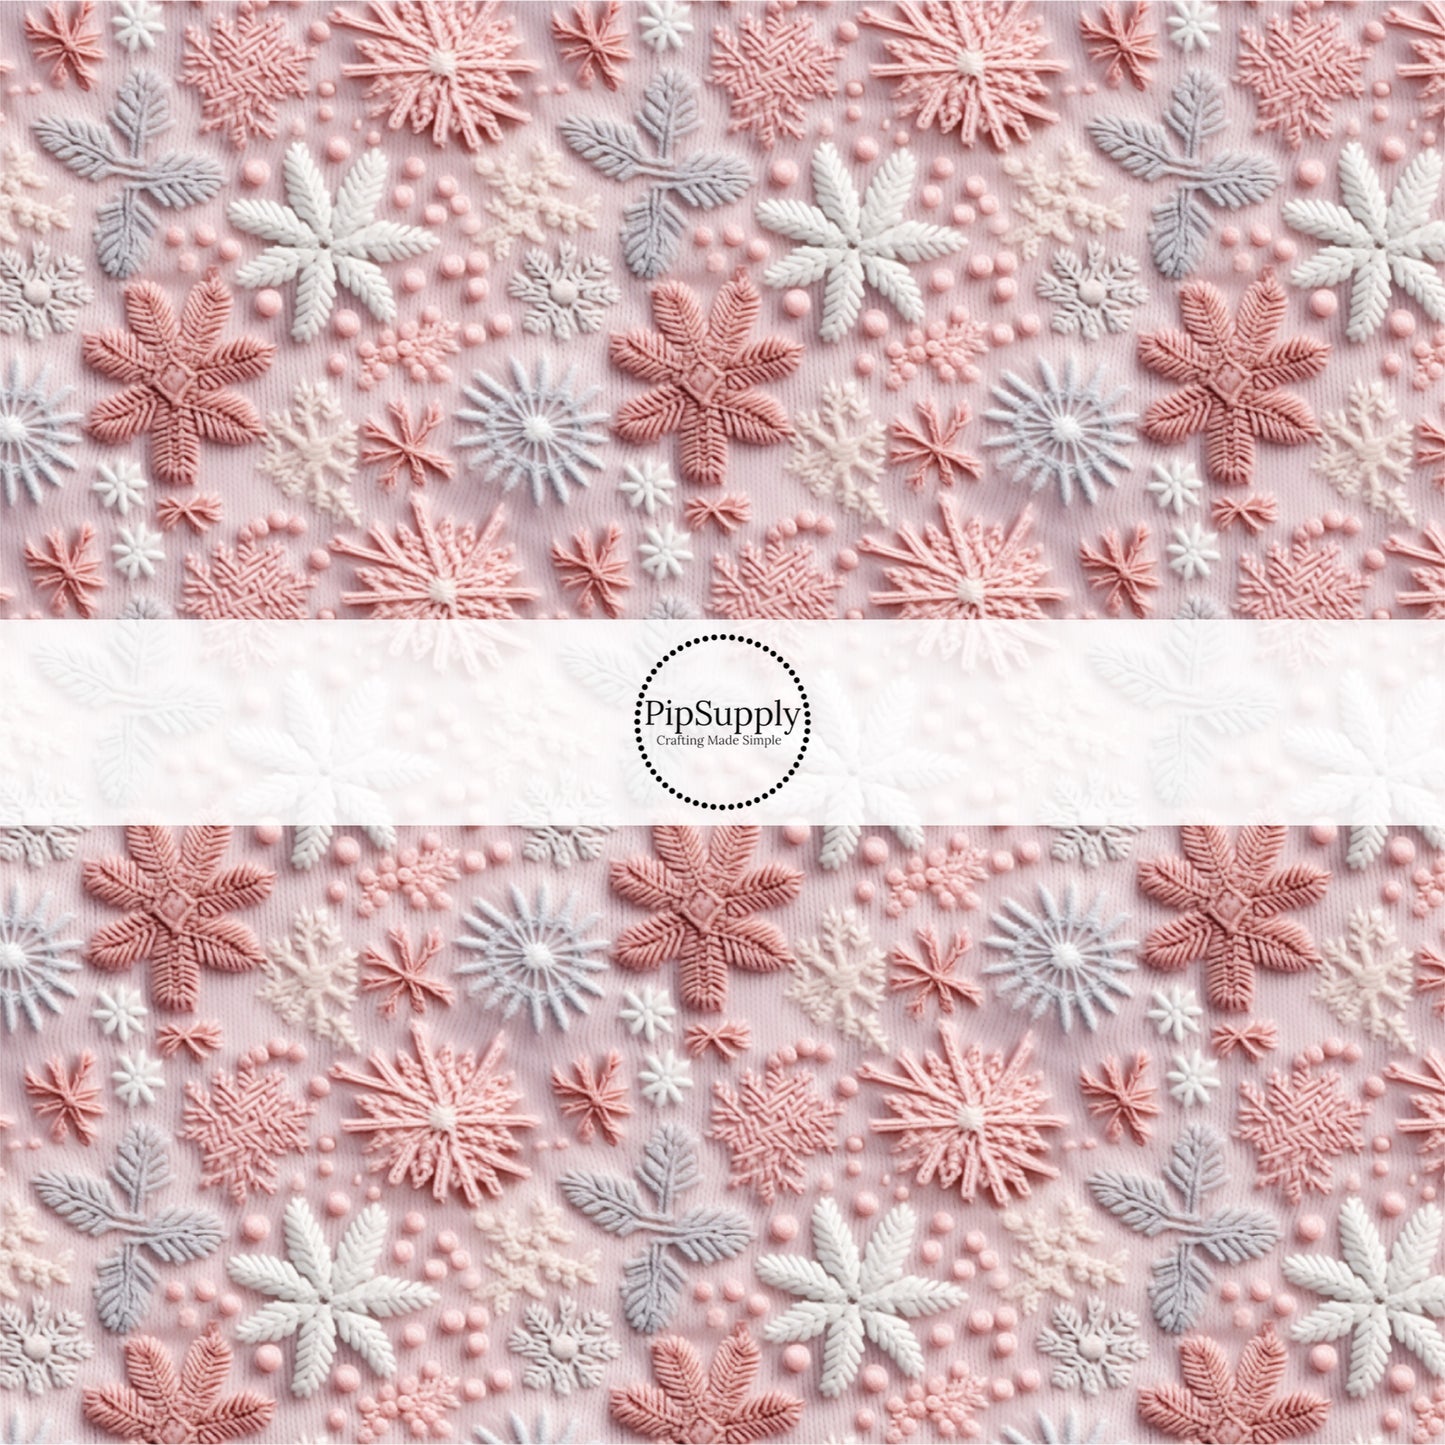 These holiday sewn pattern themed fabric by the yard features pink, purple, and white snowflakes on light pink. This fun Christmas fabric can be used for all your sewing and crafting needs!